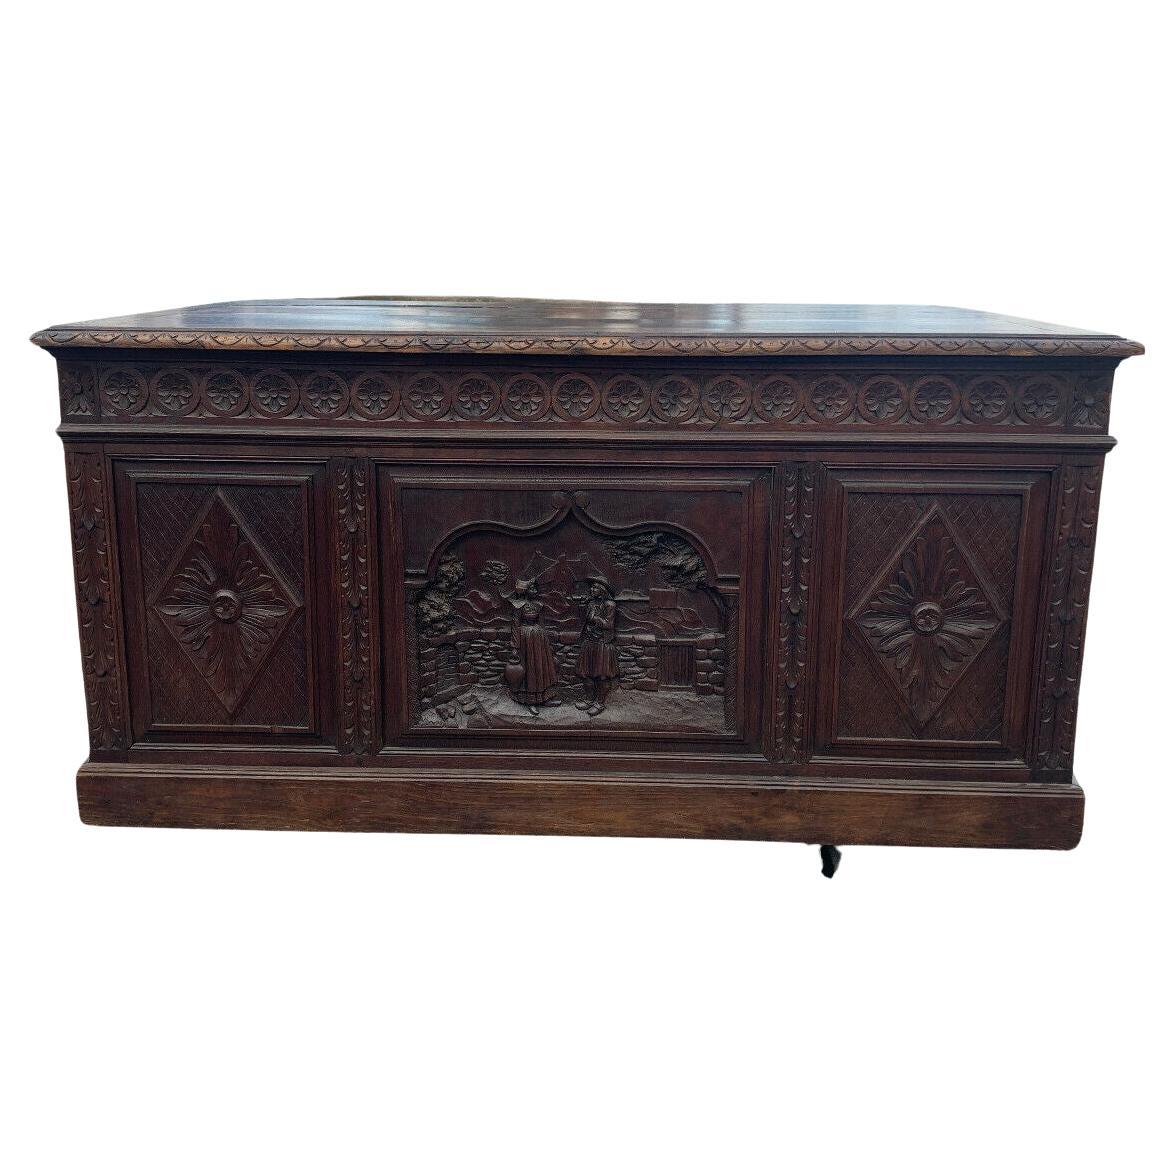 1800's Antique Breton, Highly Carved, Rare, 6 Drawers, French Desk For Sale